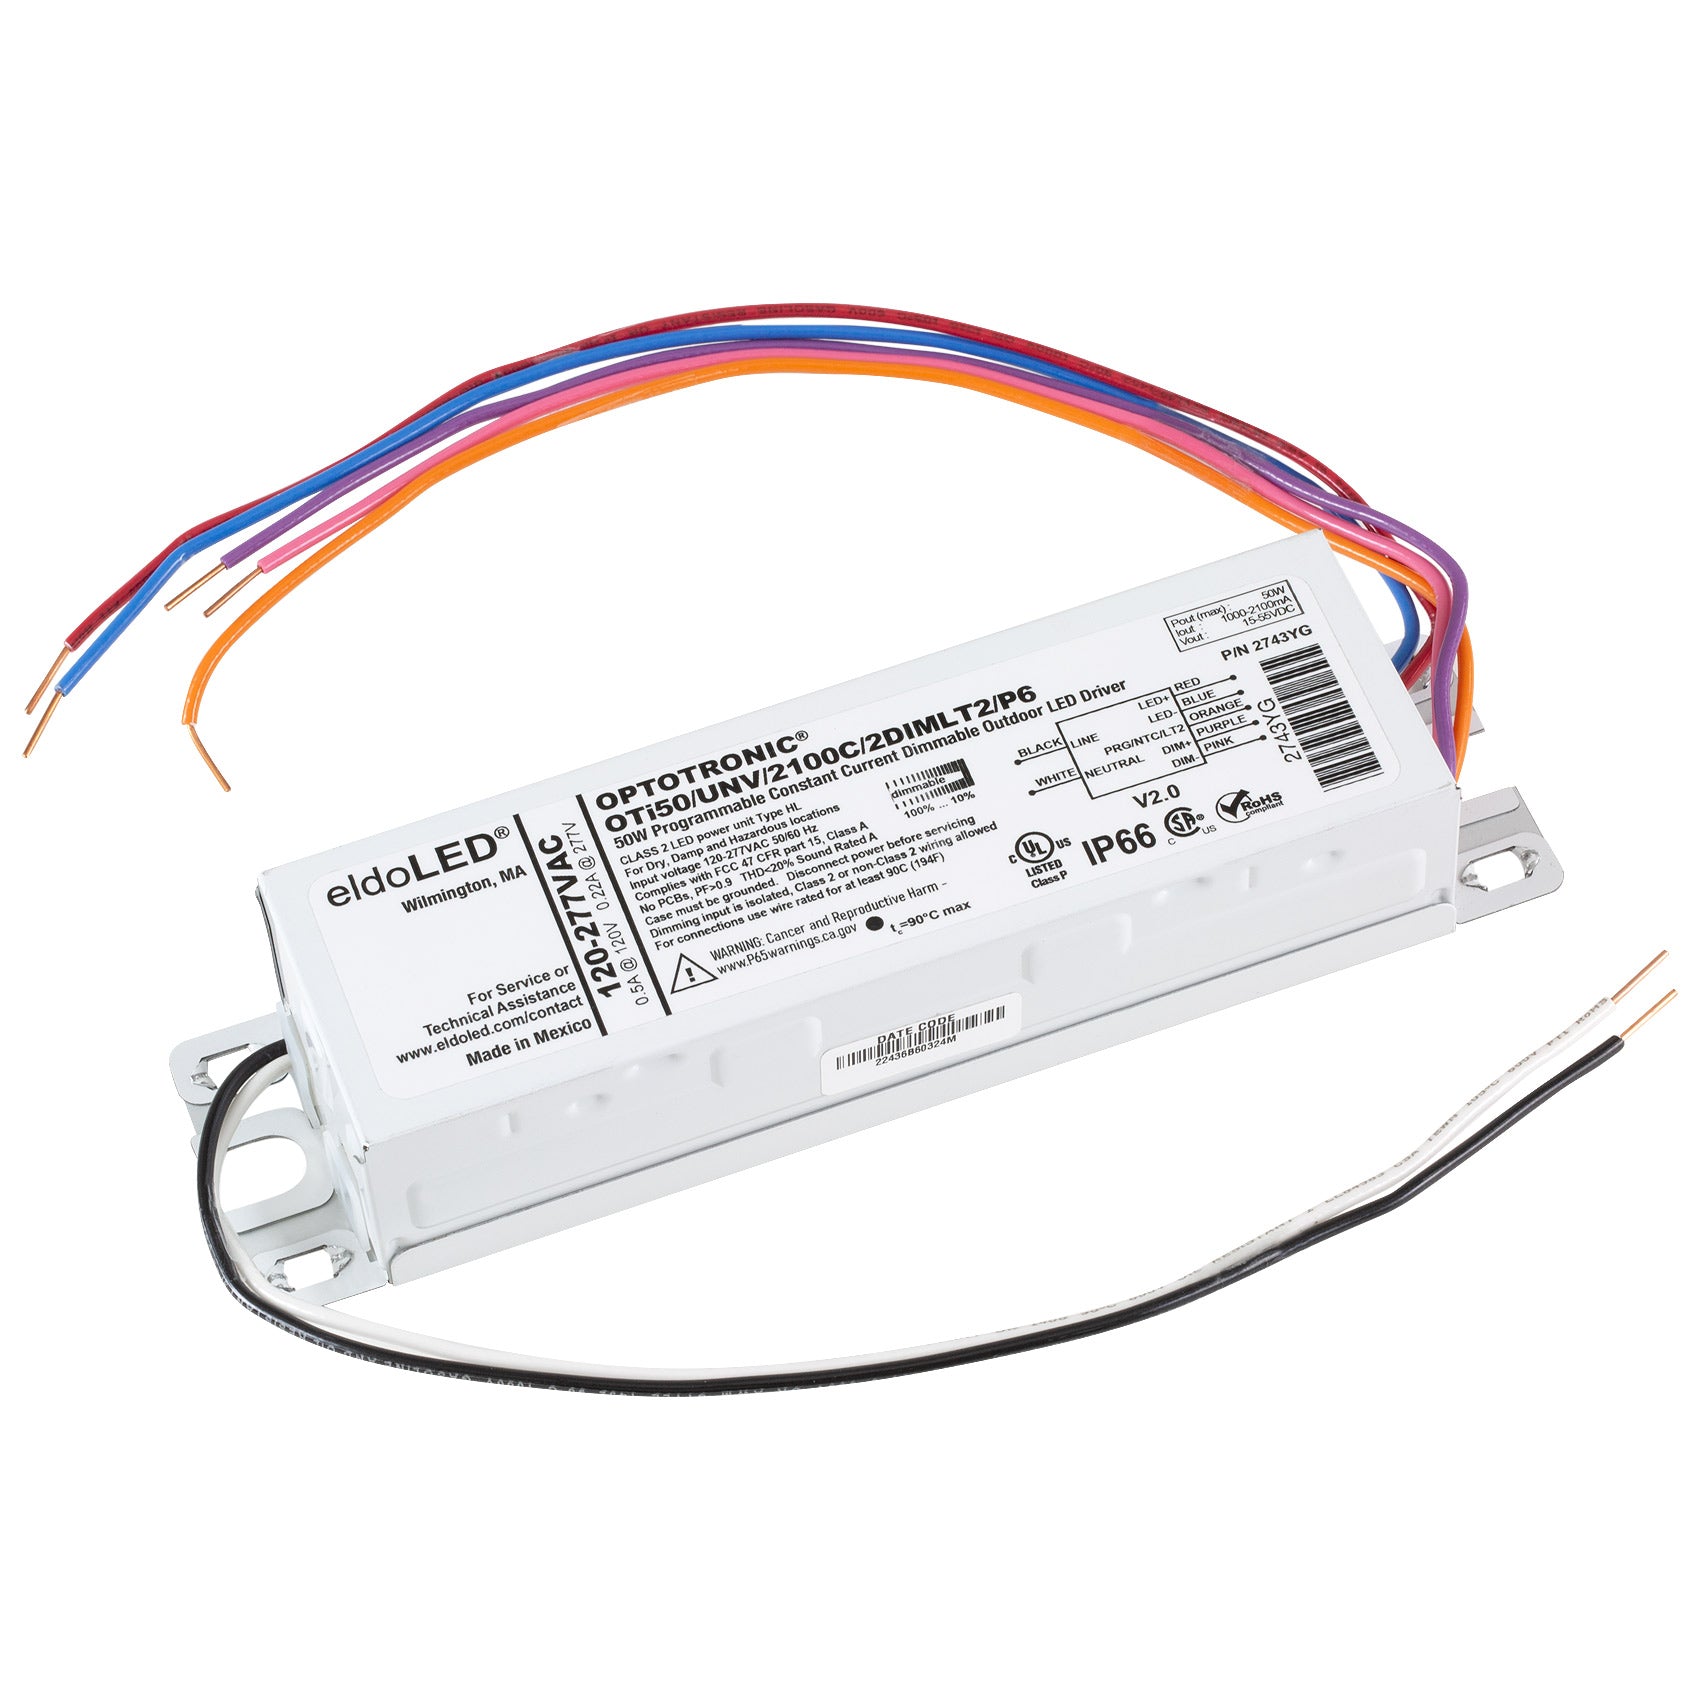 eldoLED *2743YG OPTOTRONIC 50W Constant Current 0-10V Dimmable LED Driver,  Programmable Outdoor OTi50W/UNV/2100C/2DIMLT2/P6 (Osram 79278)